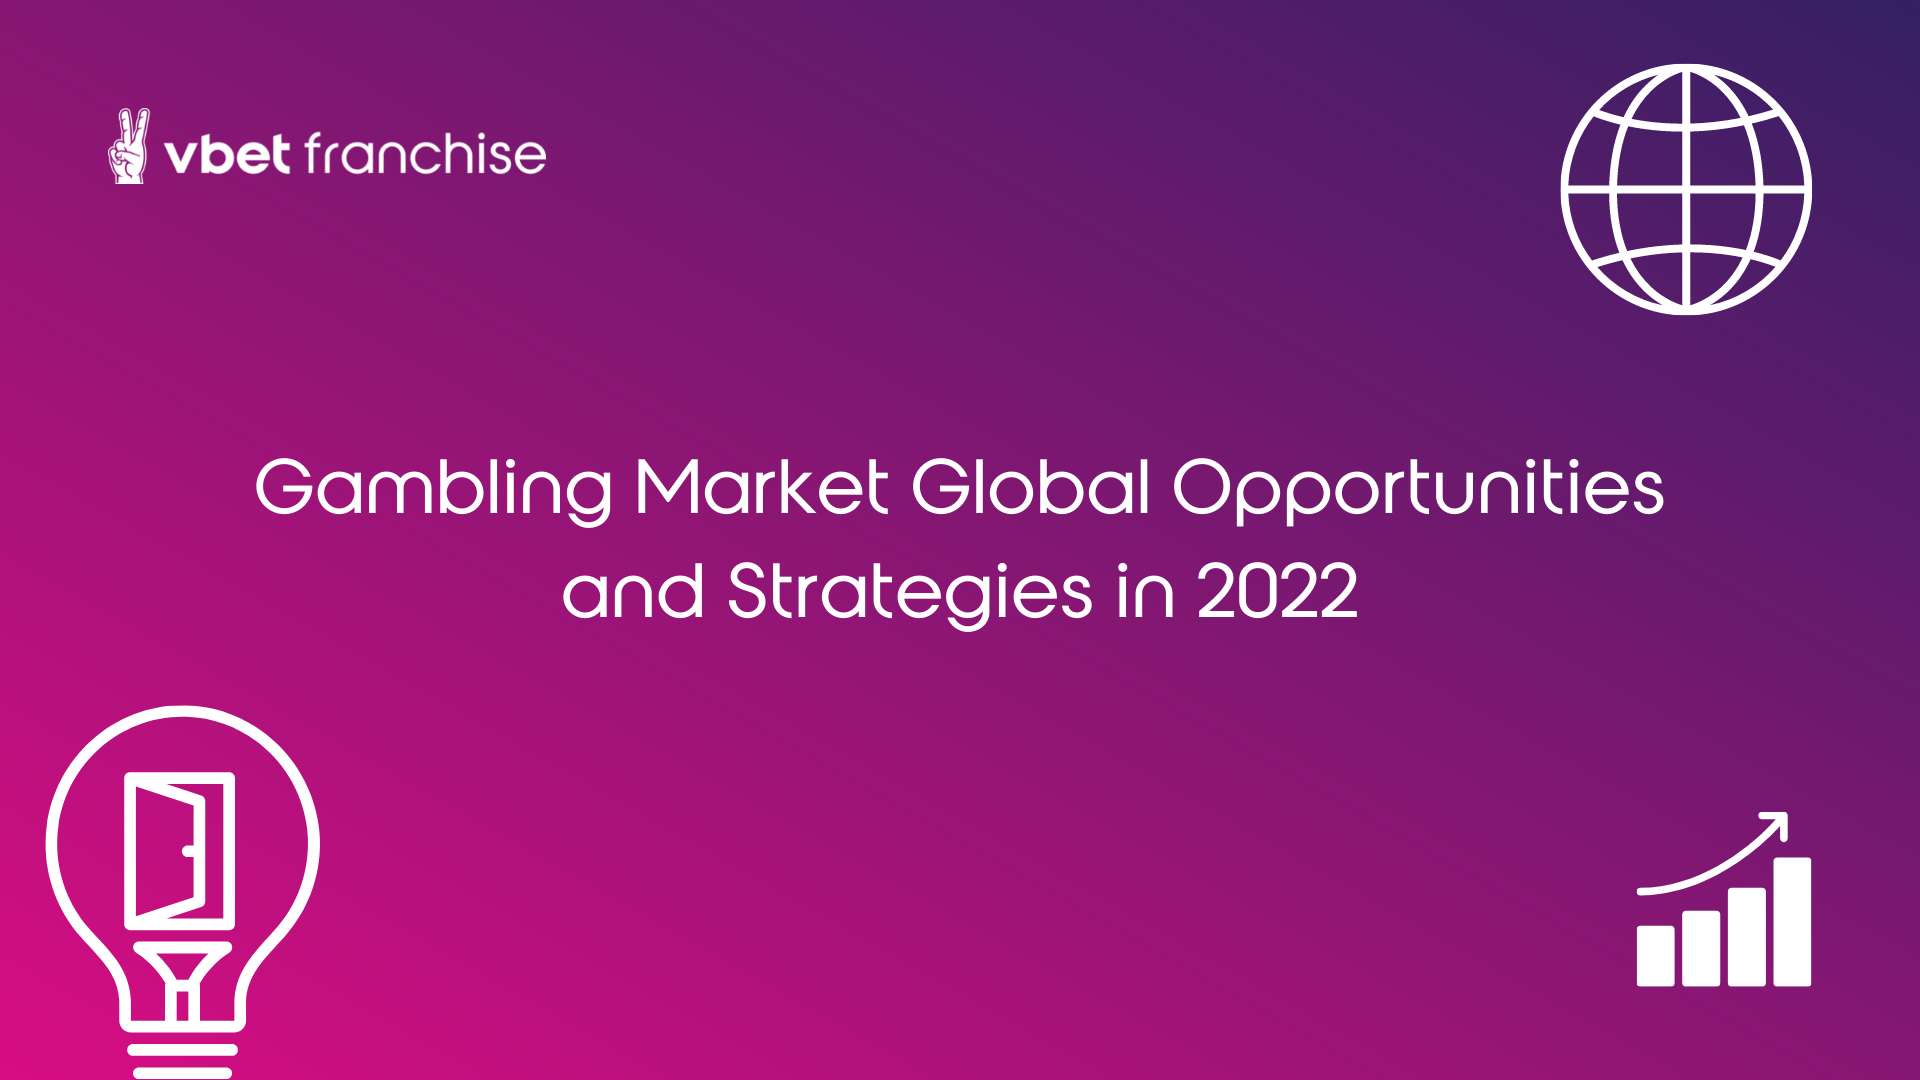 Gambling Market Global Opportunities and Strategies in 2022